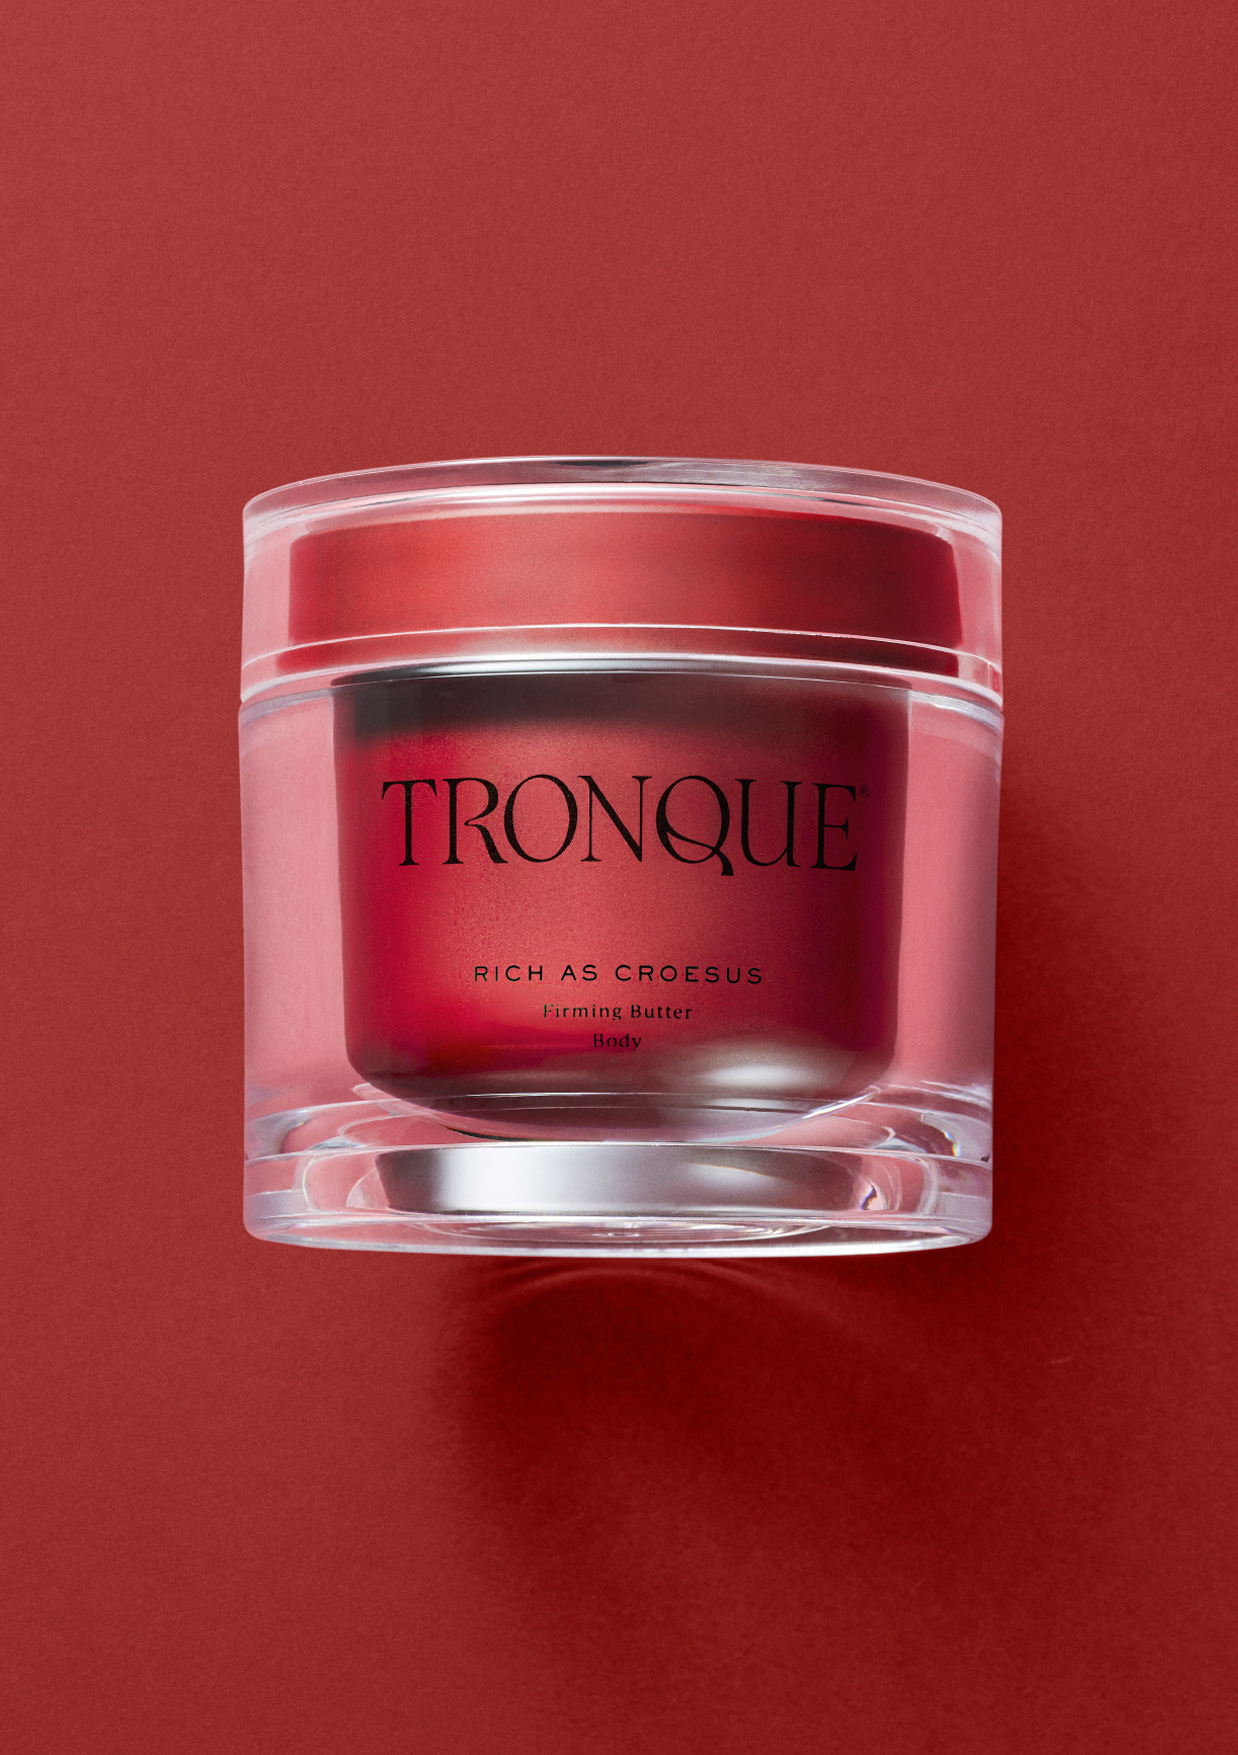 Tronque Skincare Brand and Packaging Design by Marx Design